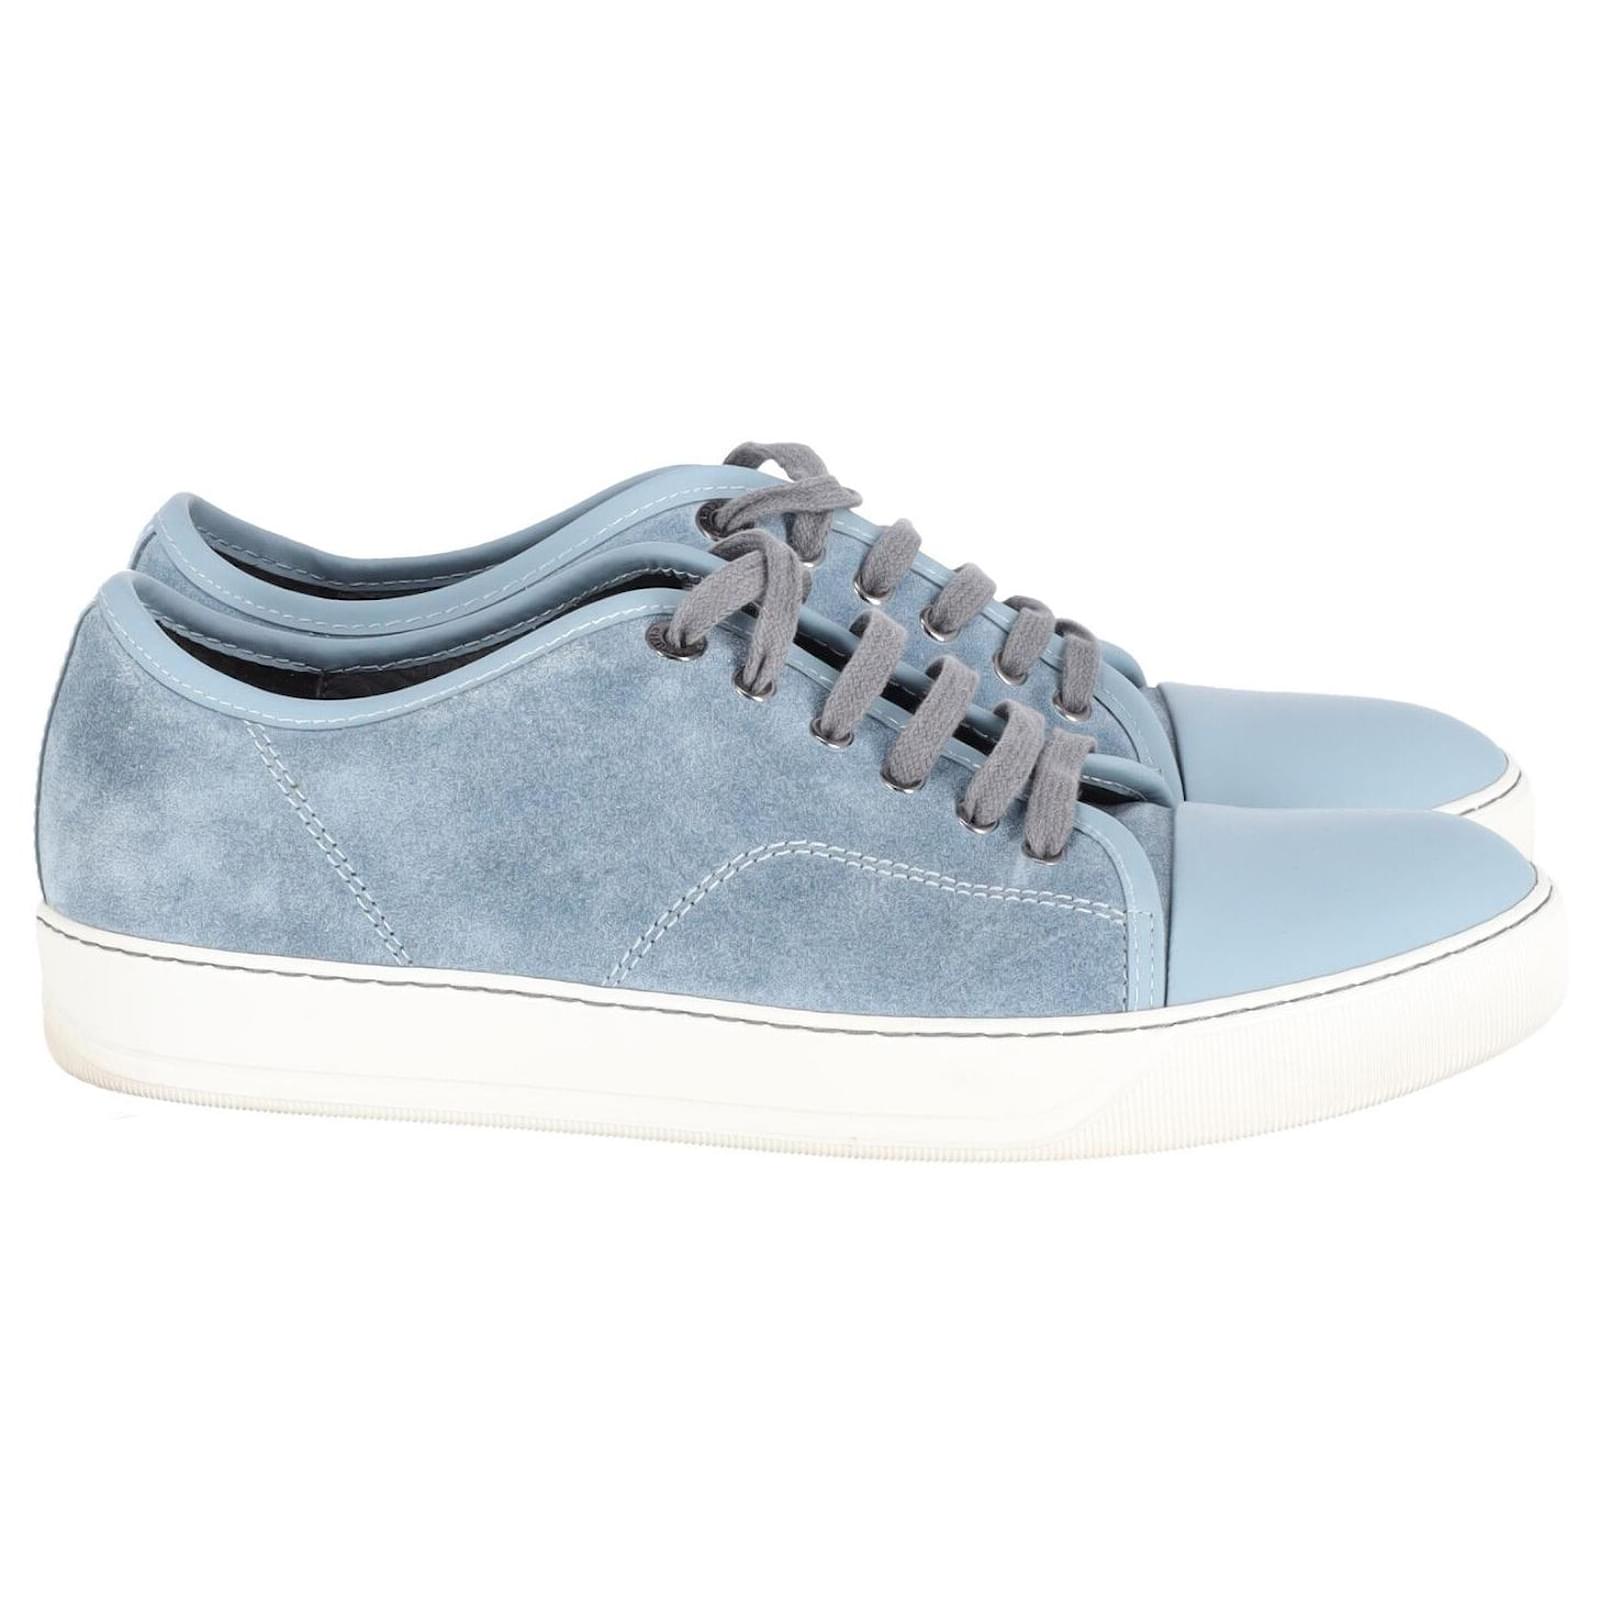 Lanvin Lace Up Sneakers in Light Suede Leather Joli